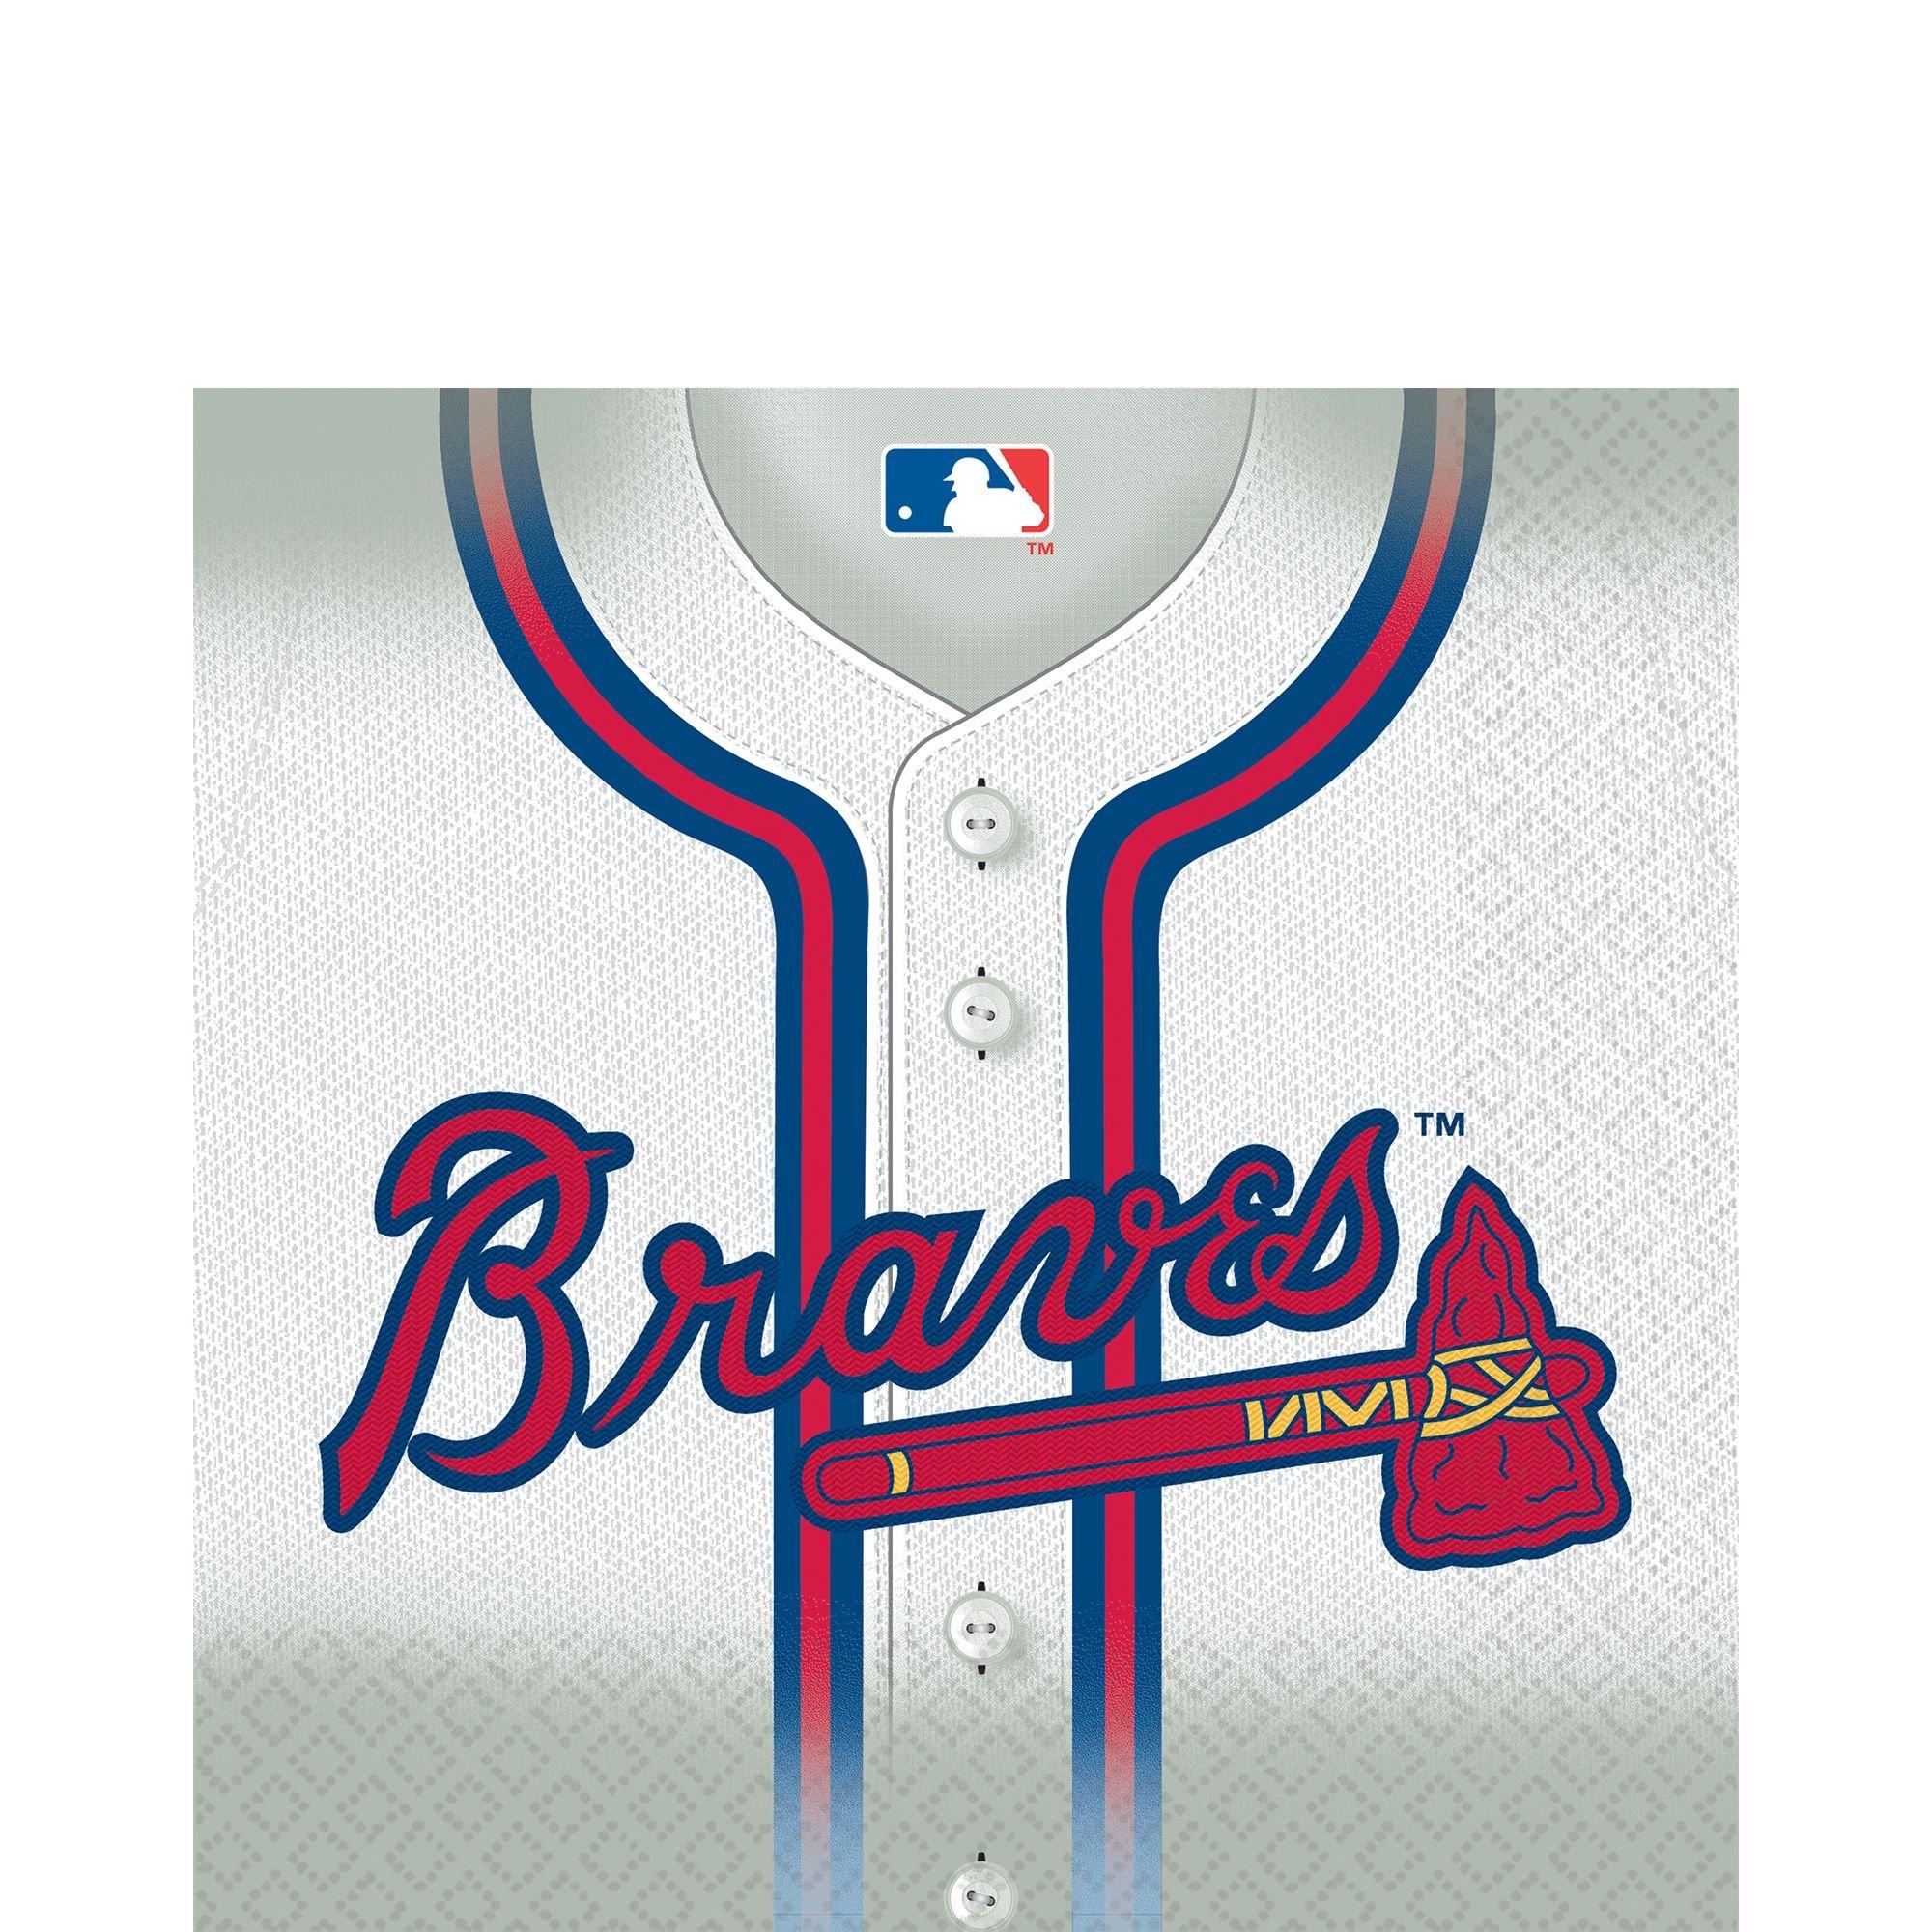 Come on, Braves. Give those sweet '80s jerseys some love